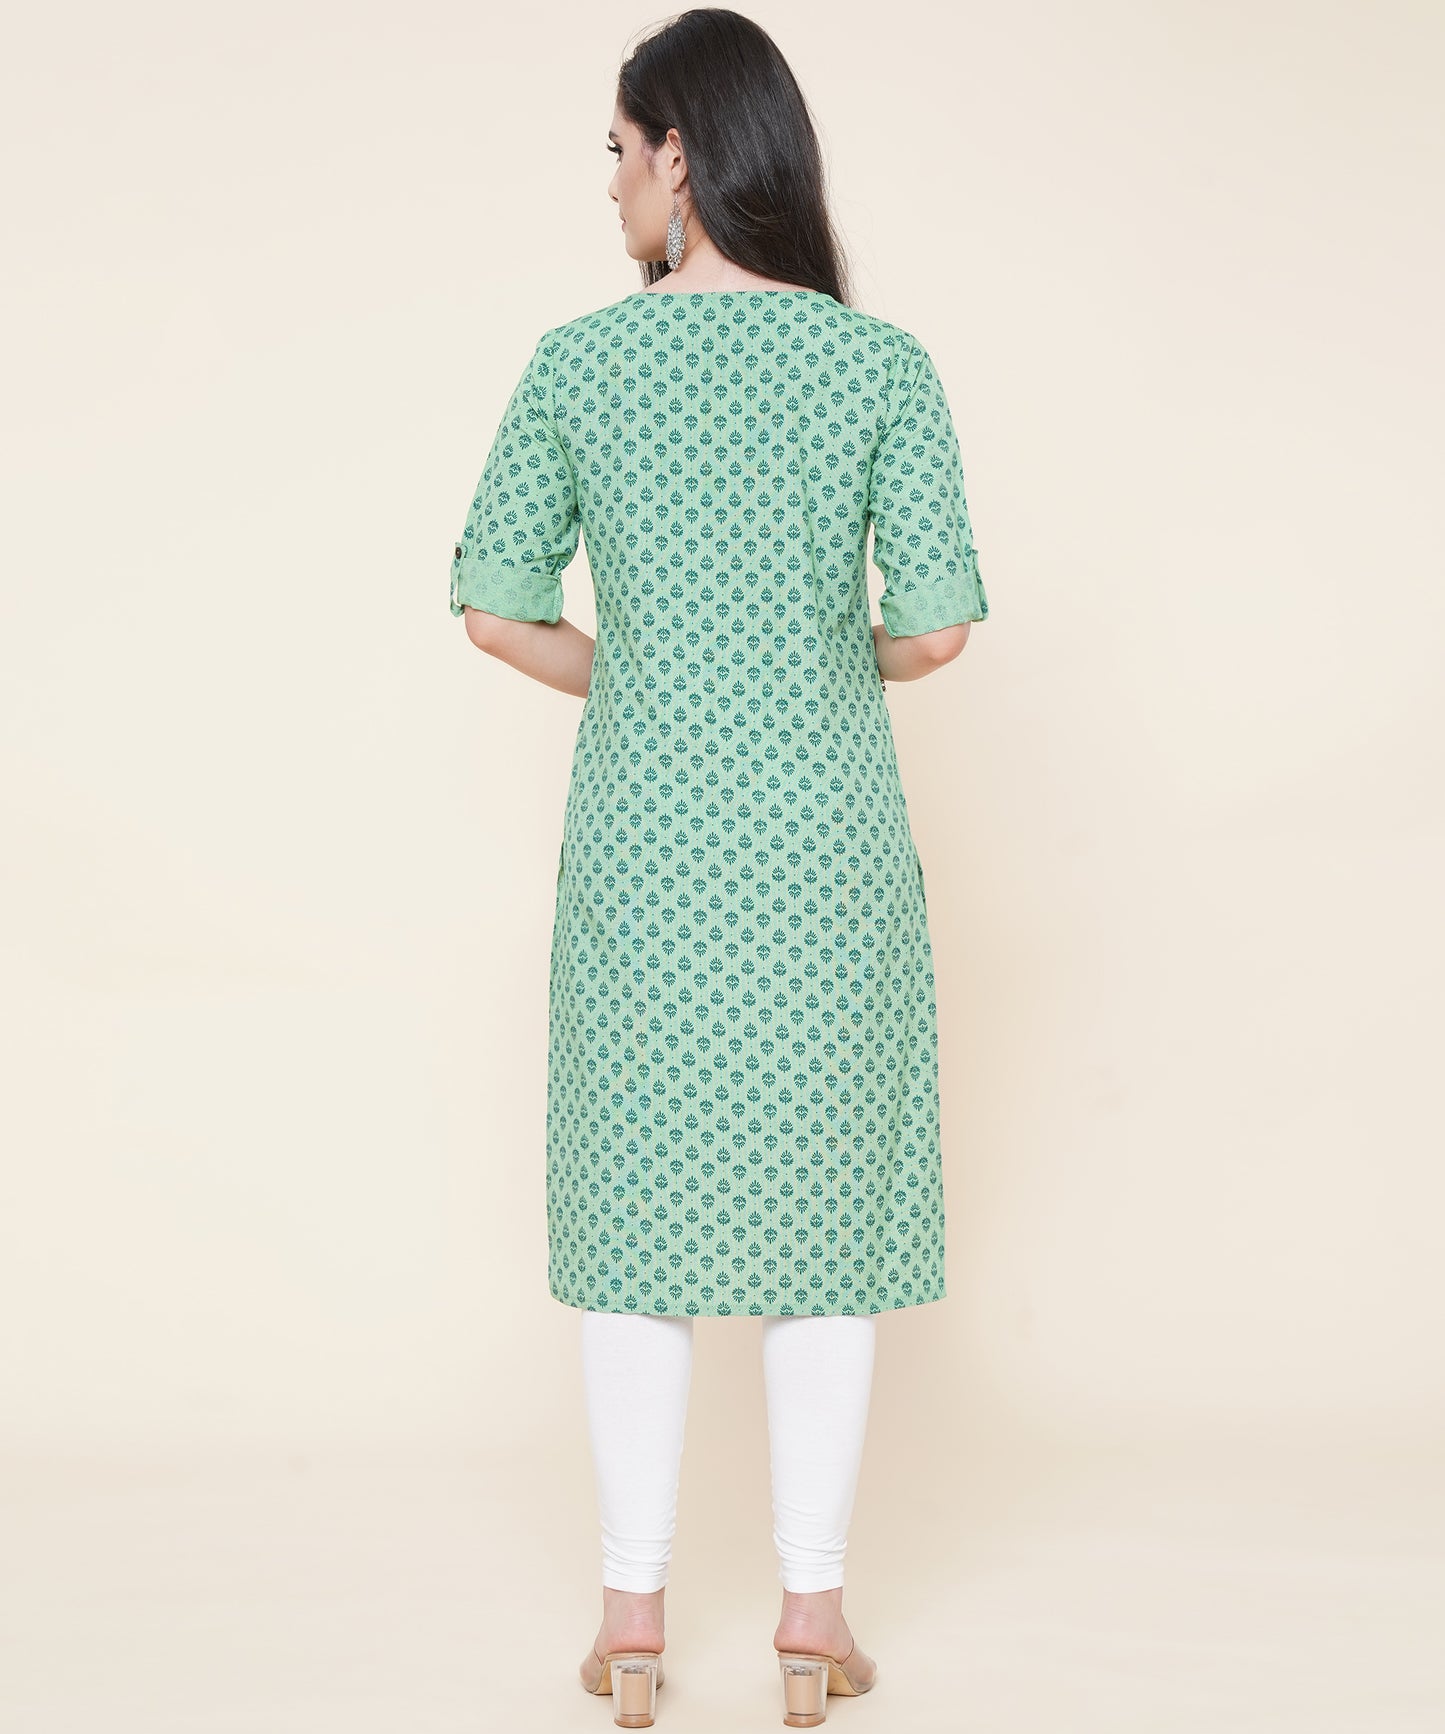 Cotton Printed Kurta Design with Tap Sleeve Button Style, Green